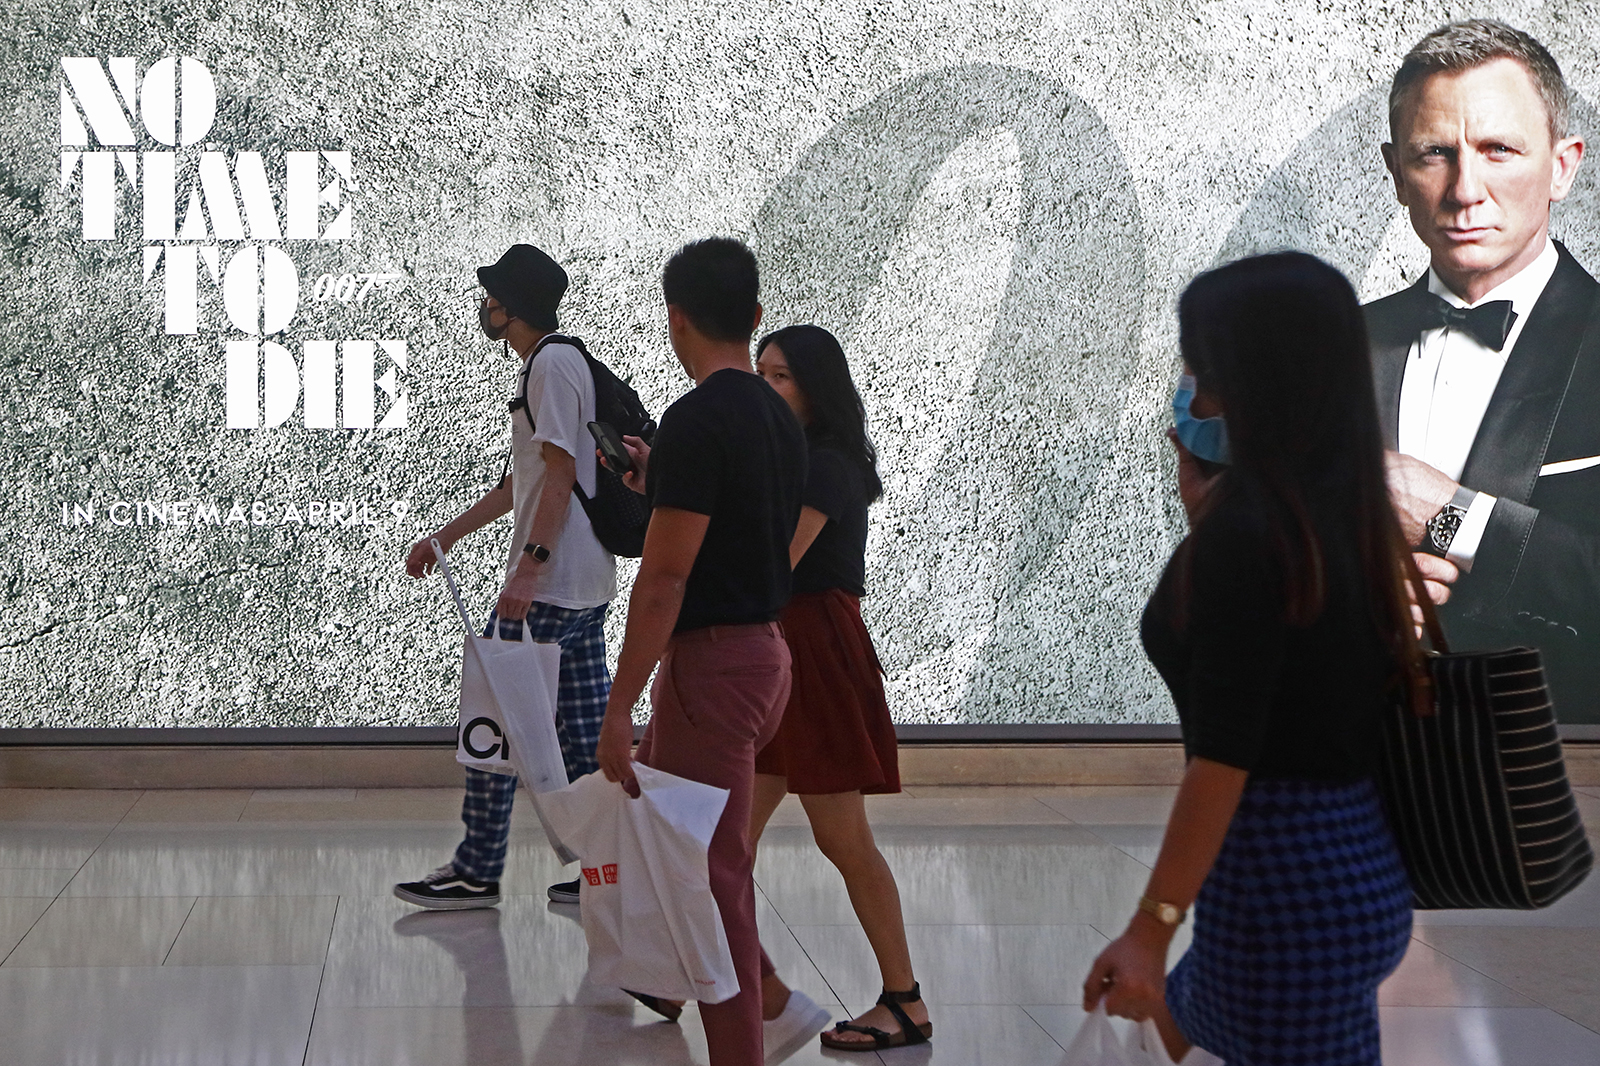 Shoppers wearing protective masks walk past a James Bond "No Time To Die" billboard in Singapore, on March 29, 2020.